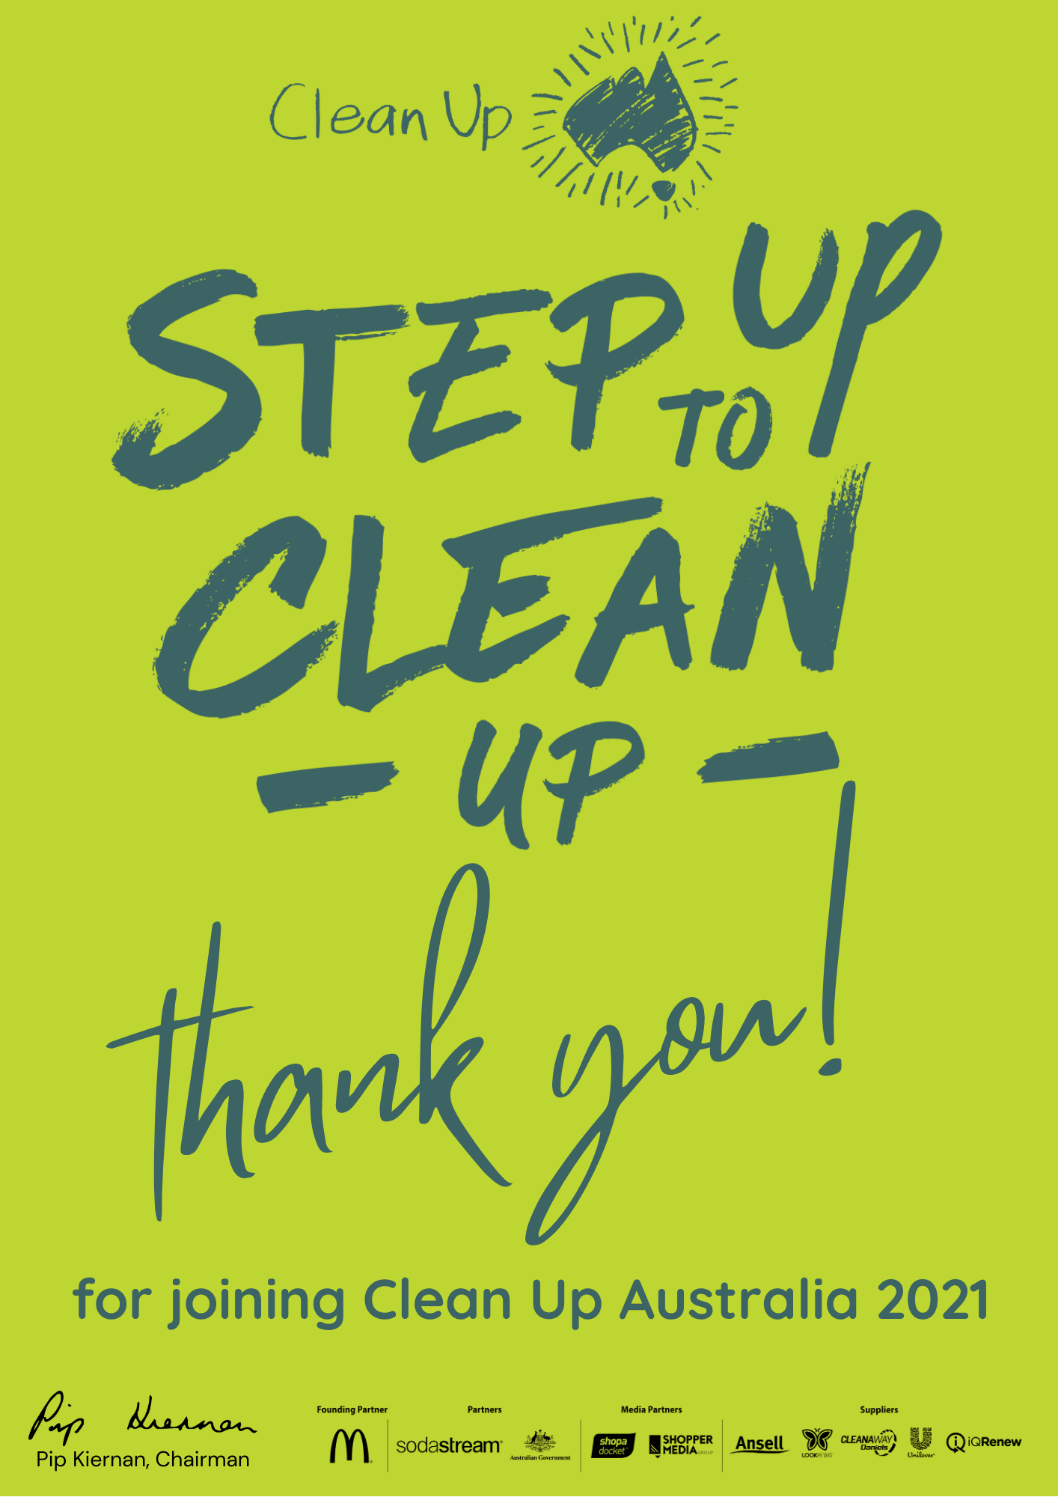 Poster related to cleaning up green areas in Australia